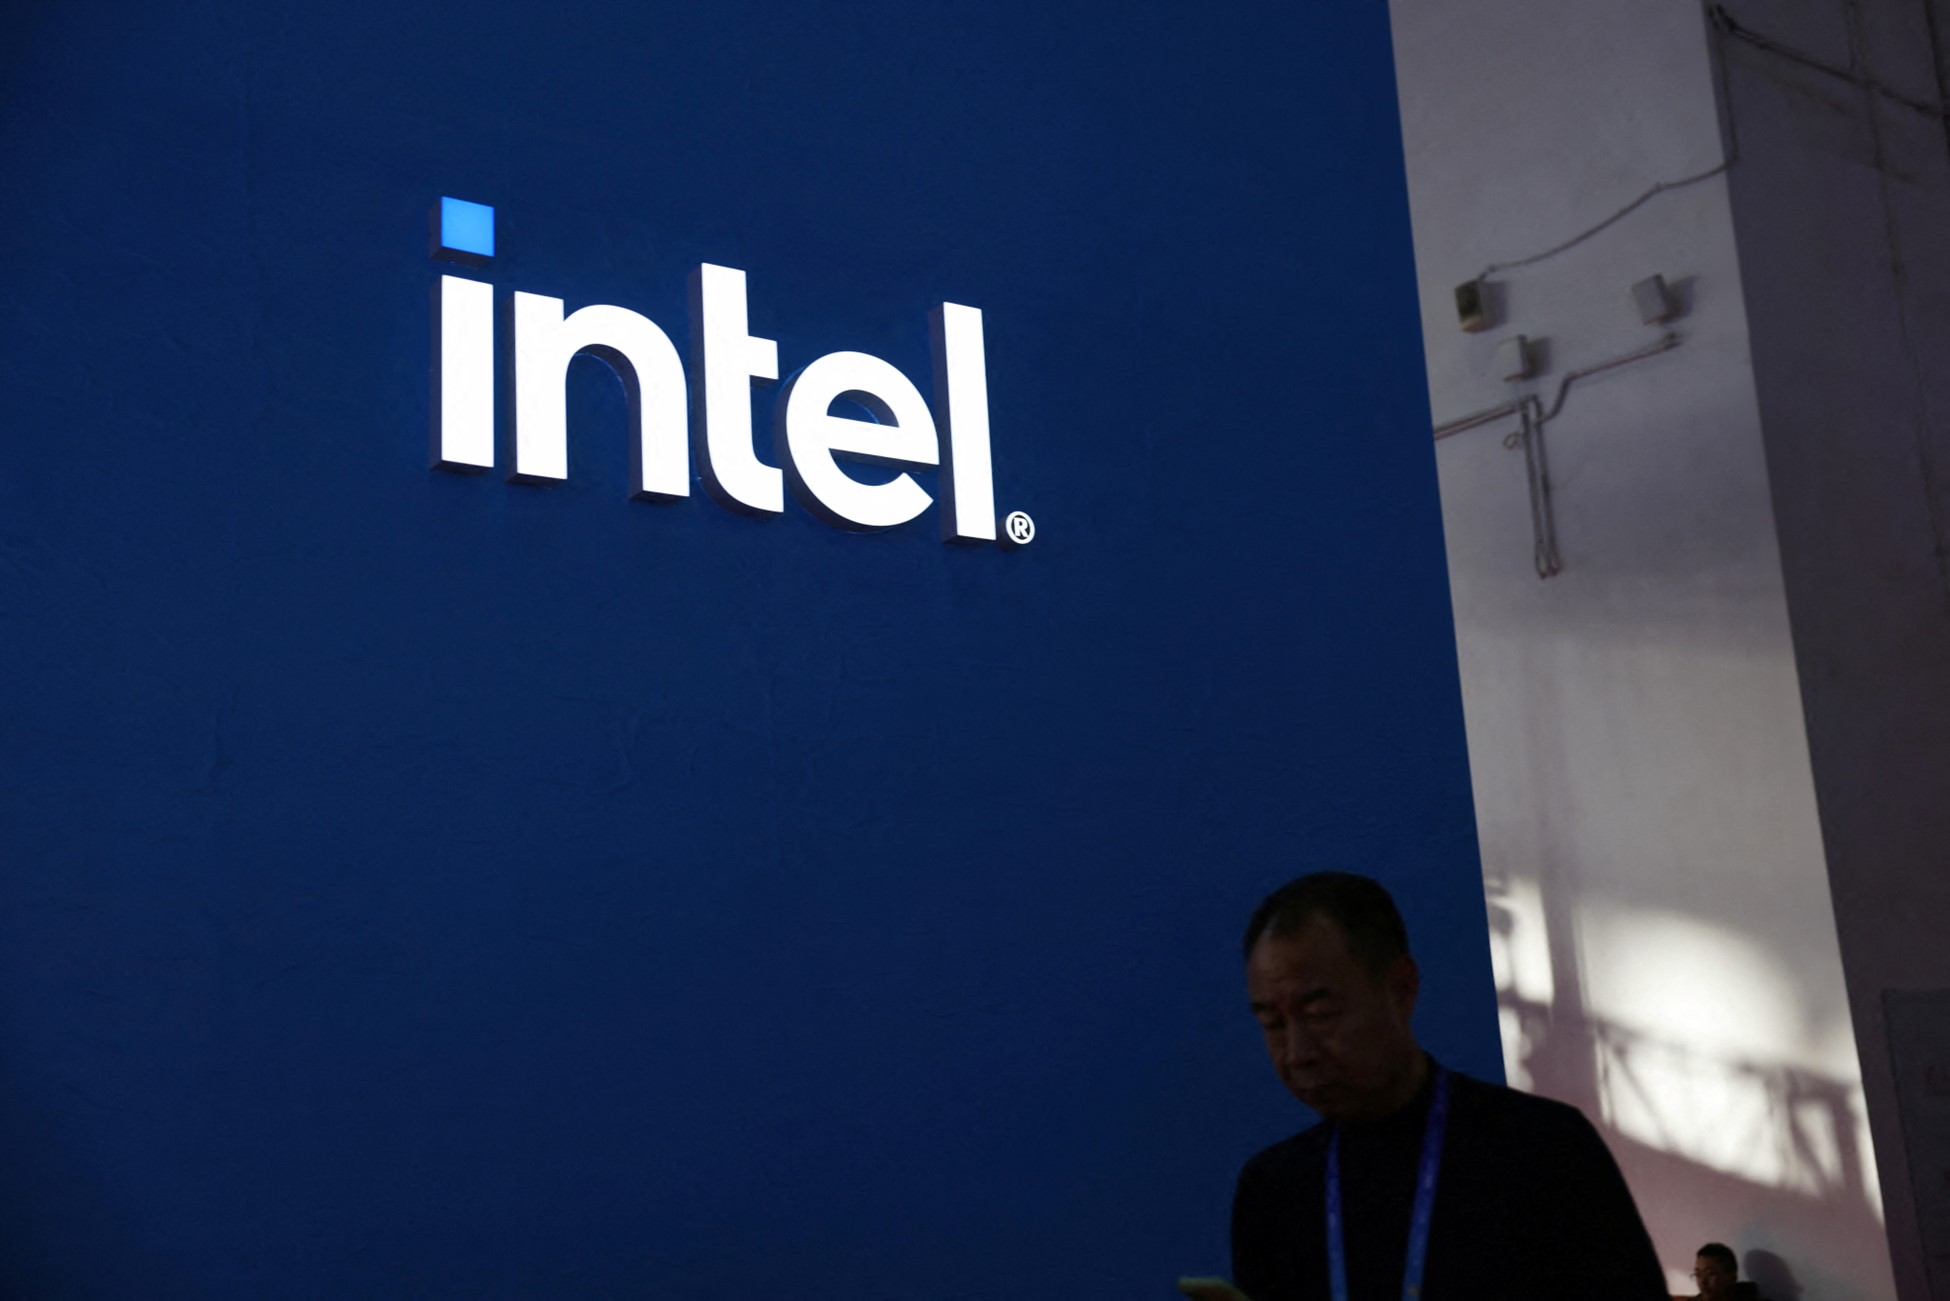 Intel Faces Tough Times: How the Tech Giant's $7 Billion Loss is Shaking Up the Chip World